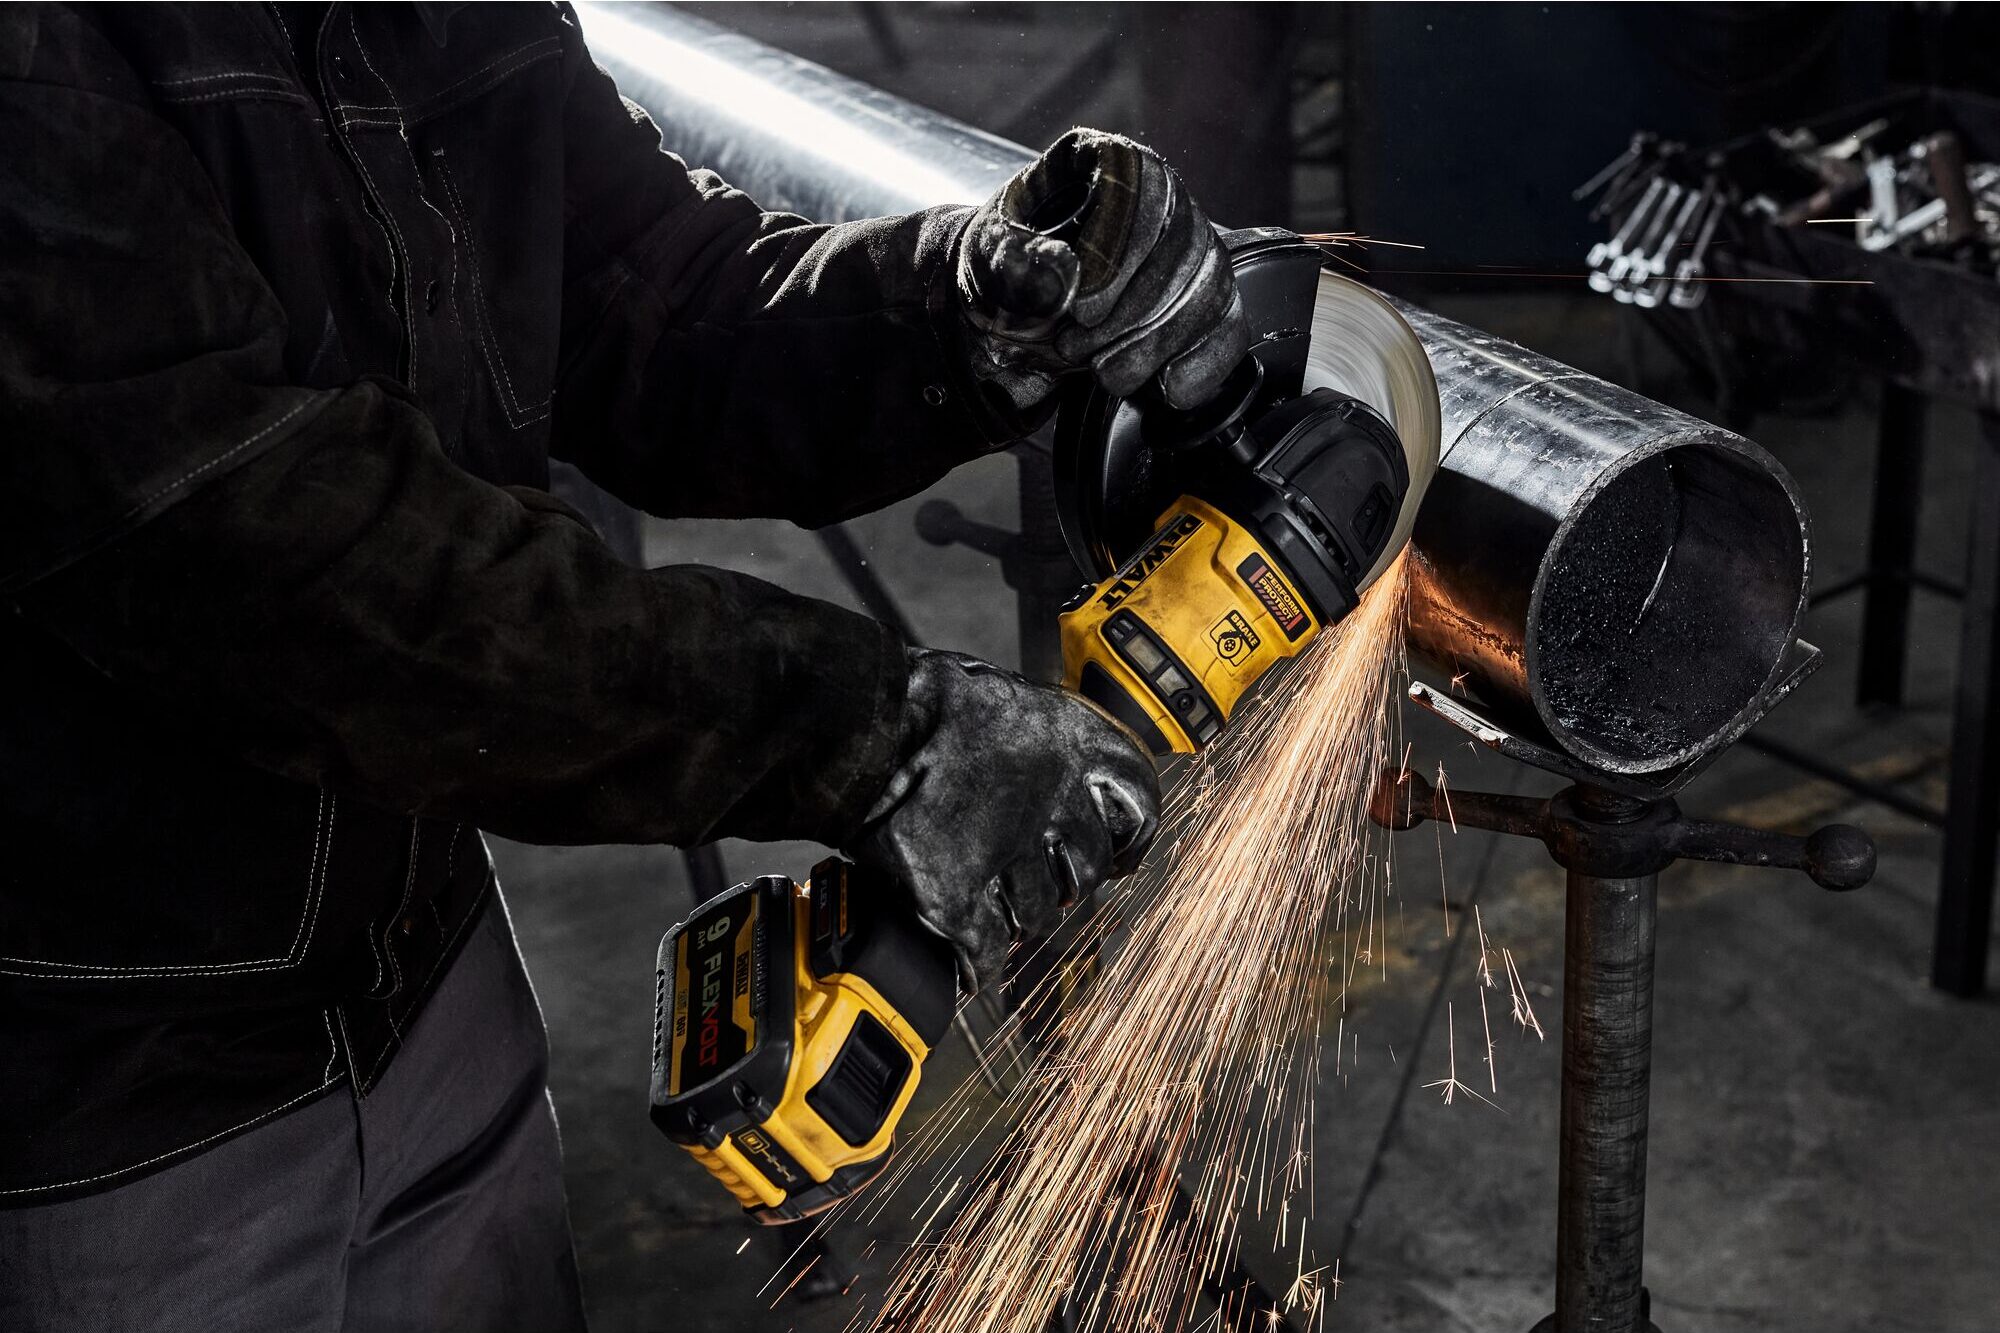 The 60V MAX Brushless Cordless 7-In. FLEXVOLT Grinder with Kickback Brake-- the newest and most powerful cordless angle grinder from DeWalt-- cuts through a metal pipe. 